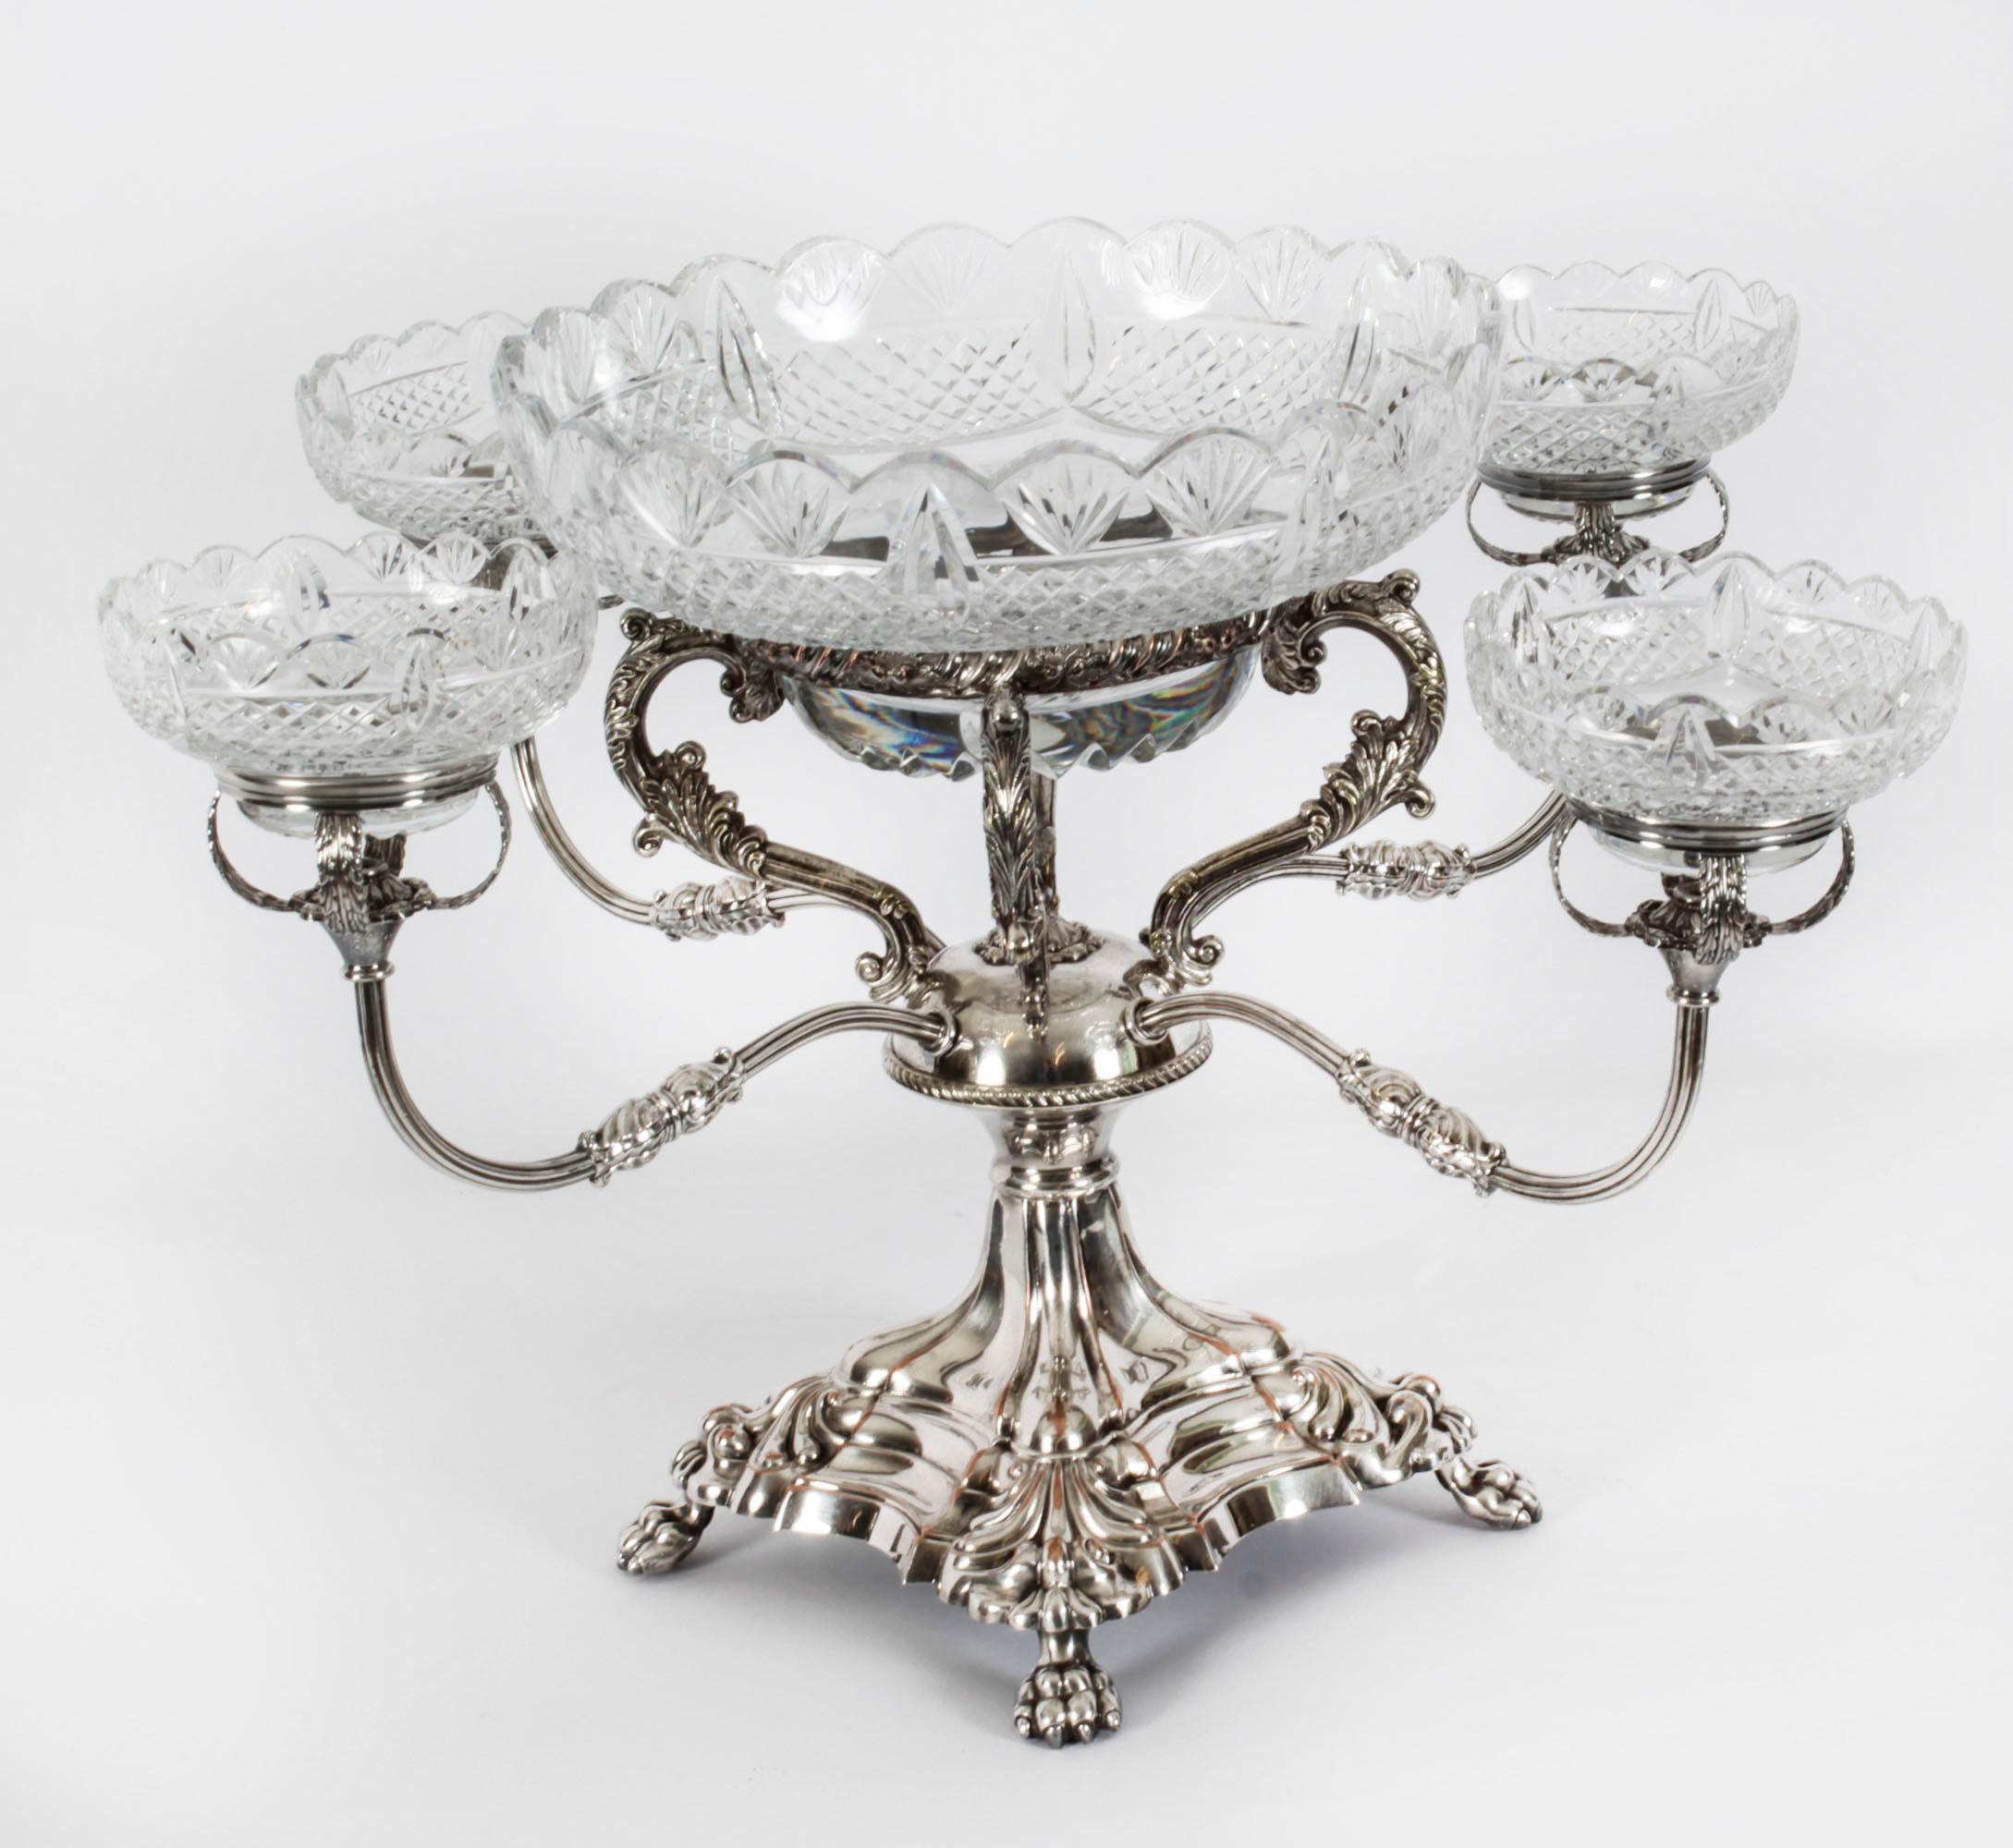 William IV Antique English Silver Plate Cut Glass Epergne Candelabra Centrepiece 19th C